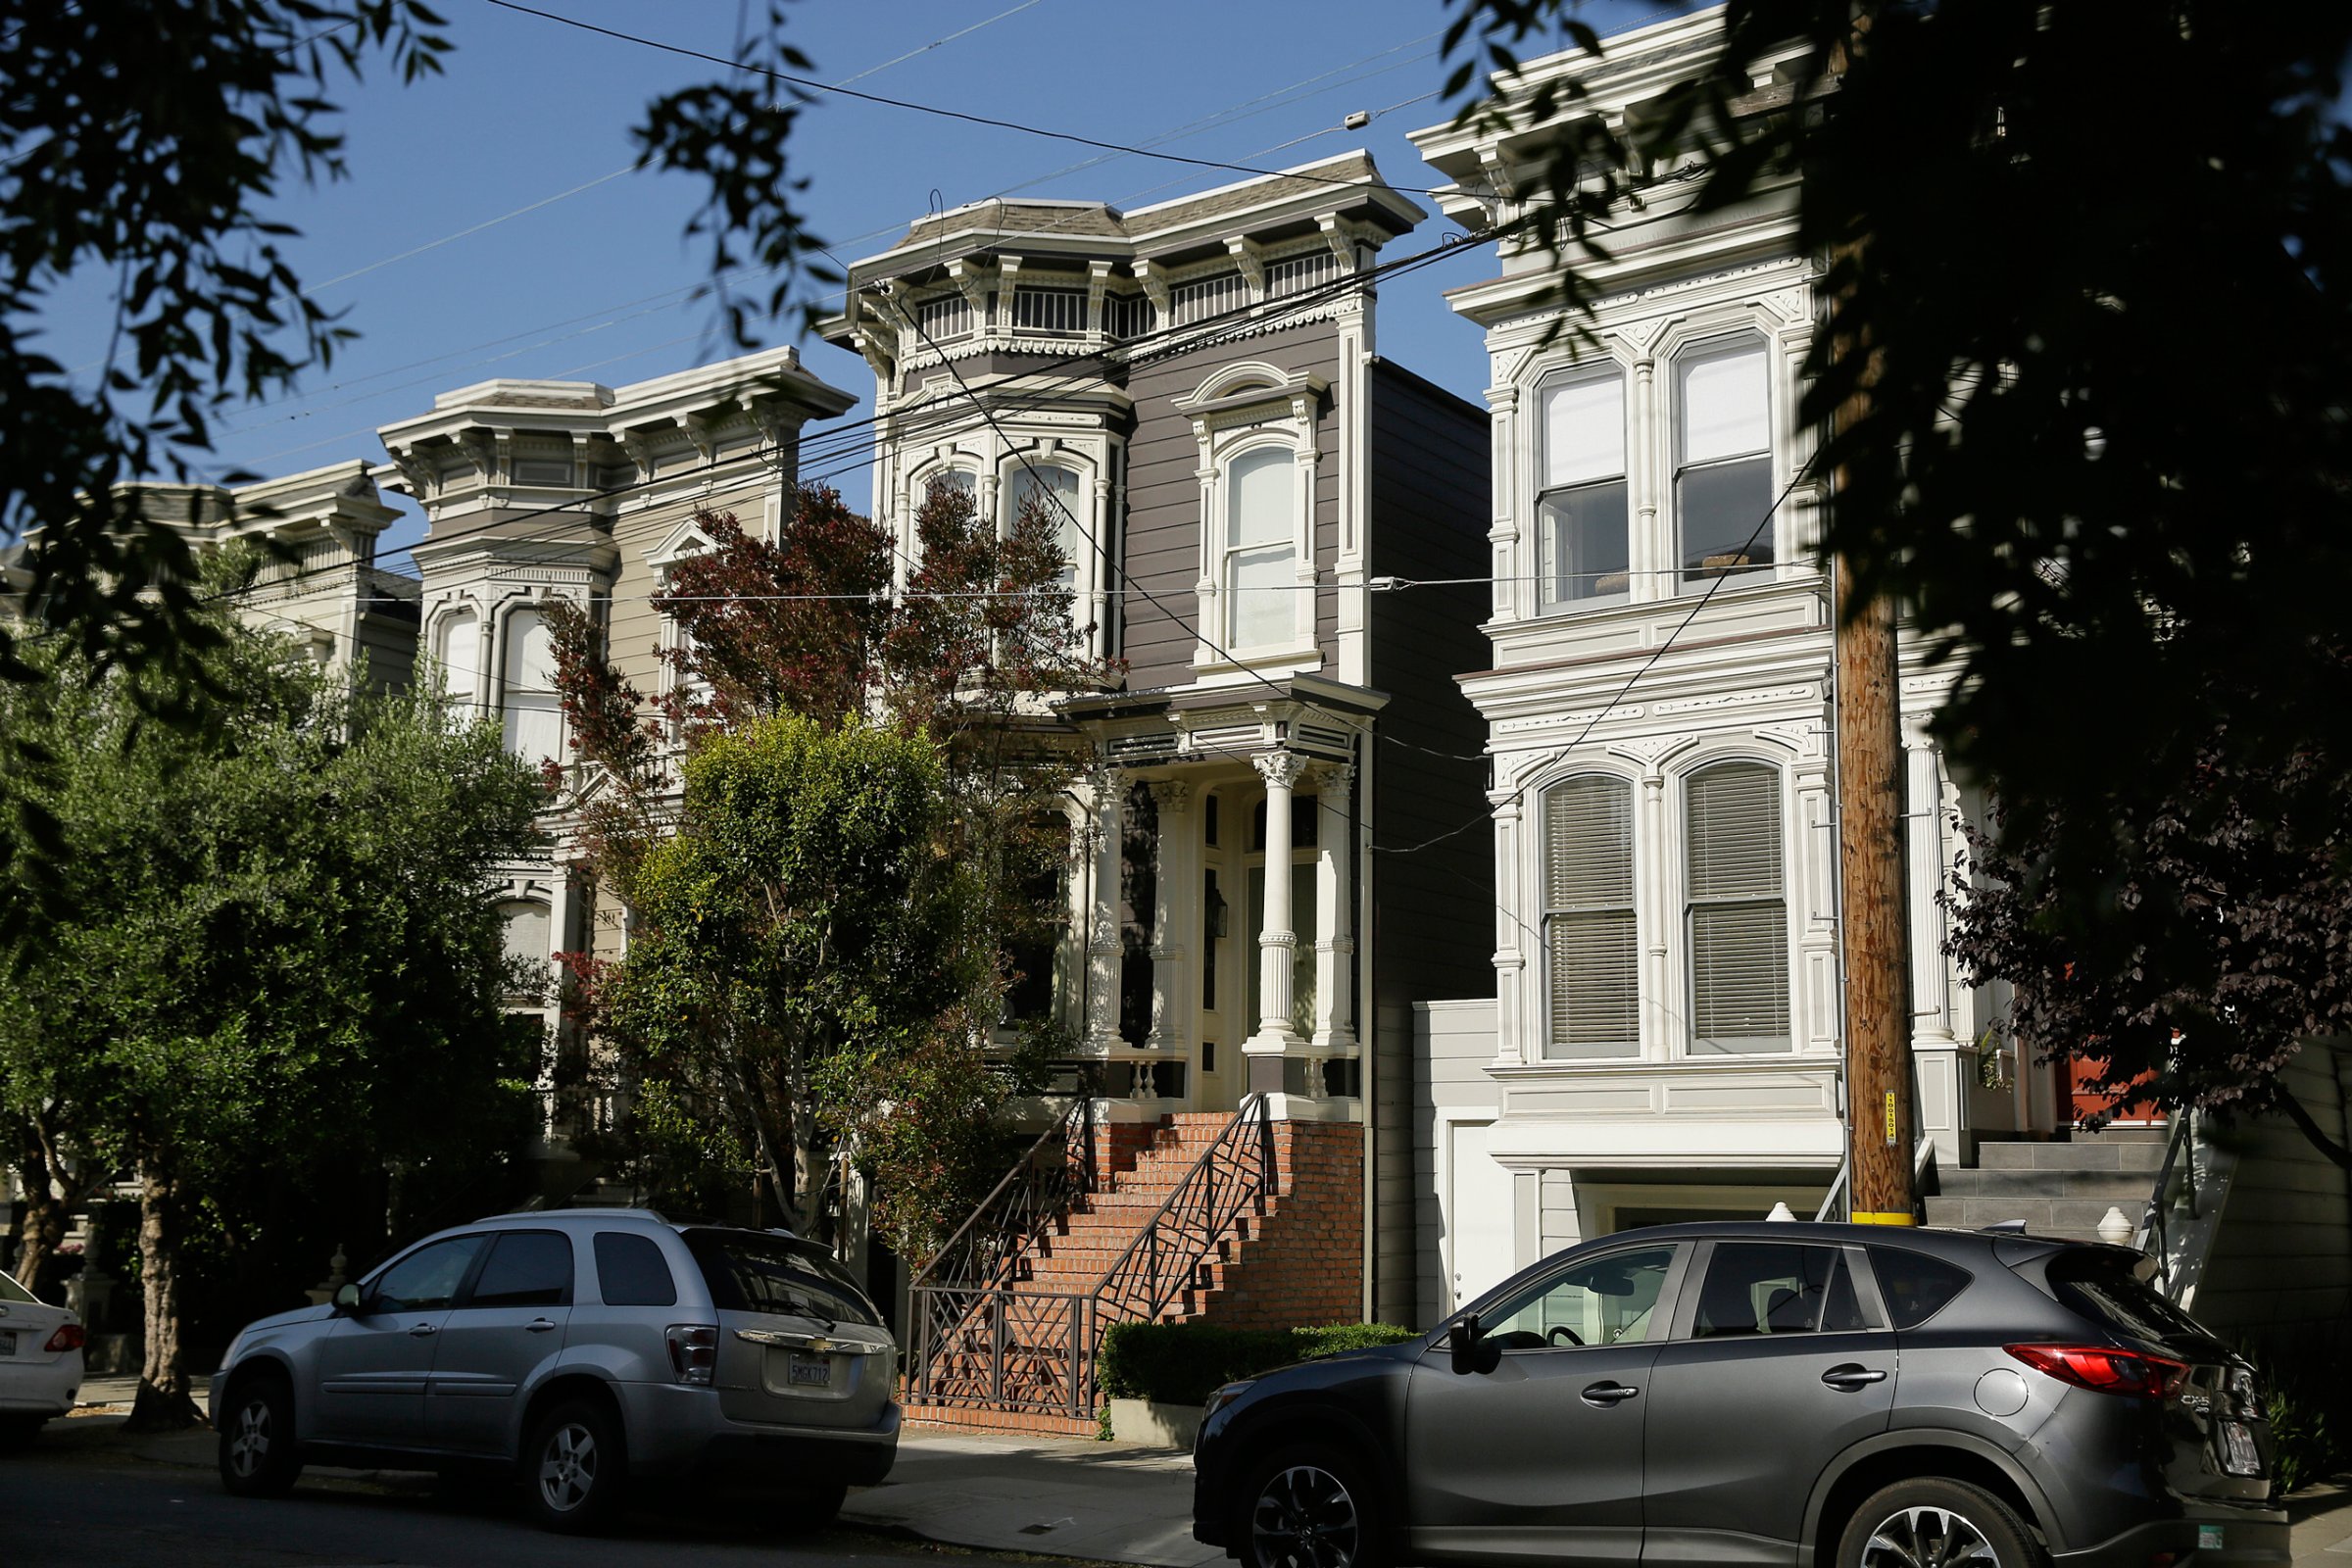 A Victorian home, center, made famous by the television show "Full House" is seen Friday, May 27, 2016, in San Francisco. The three bedroom home dating from 1883 is now for sale at $4.15 million. (AP Photo/Eric Risberg)